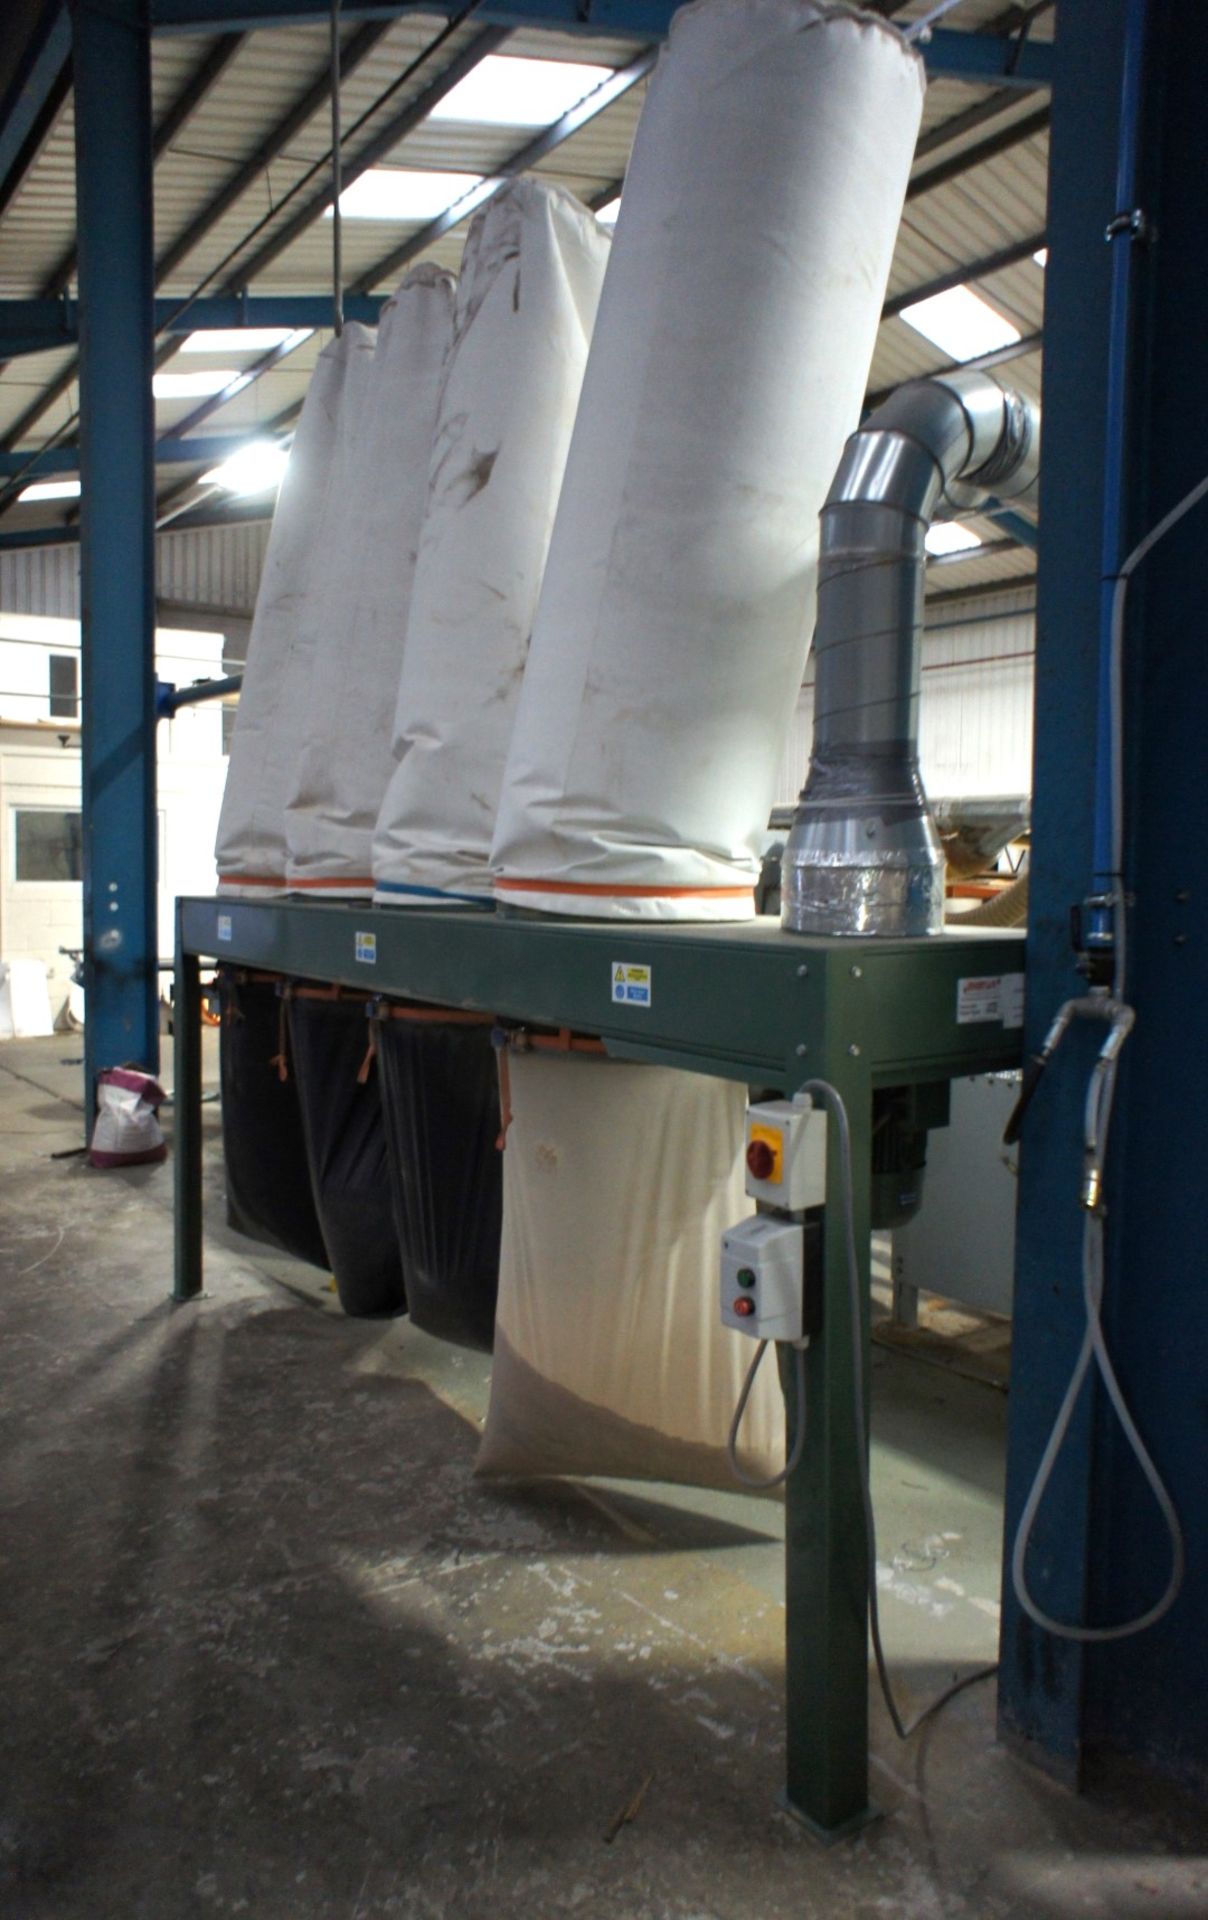 * Inventar Ltd Mk4 Four bag dust extractor. 3phase. Located at site 3 - Image 2 of 4